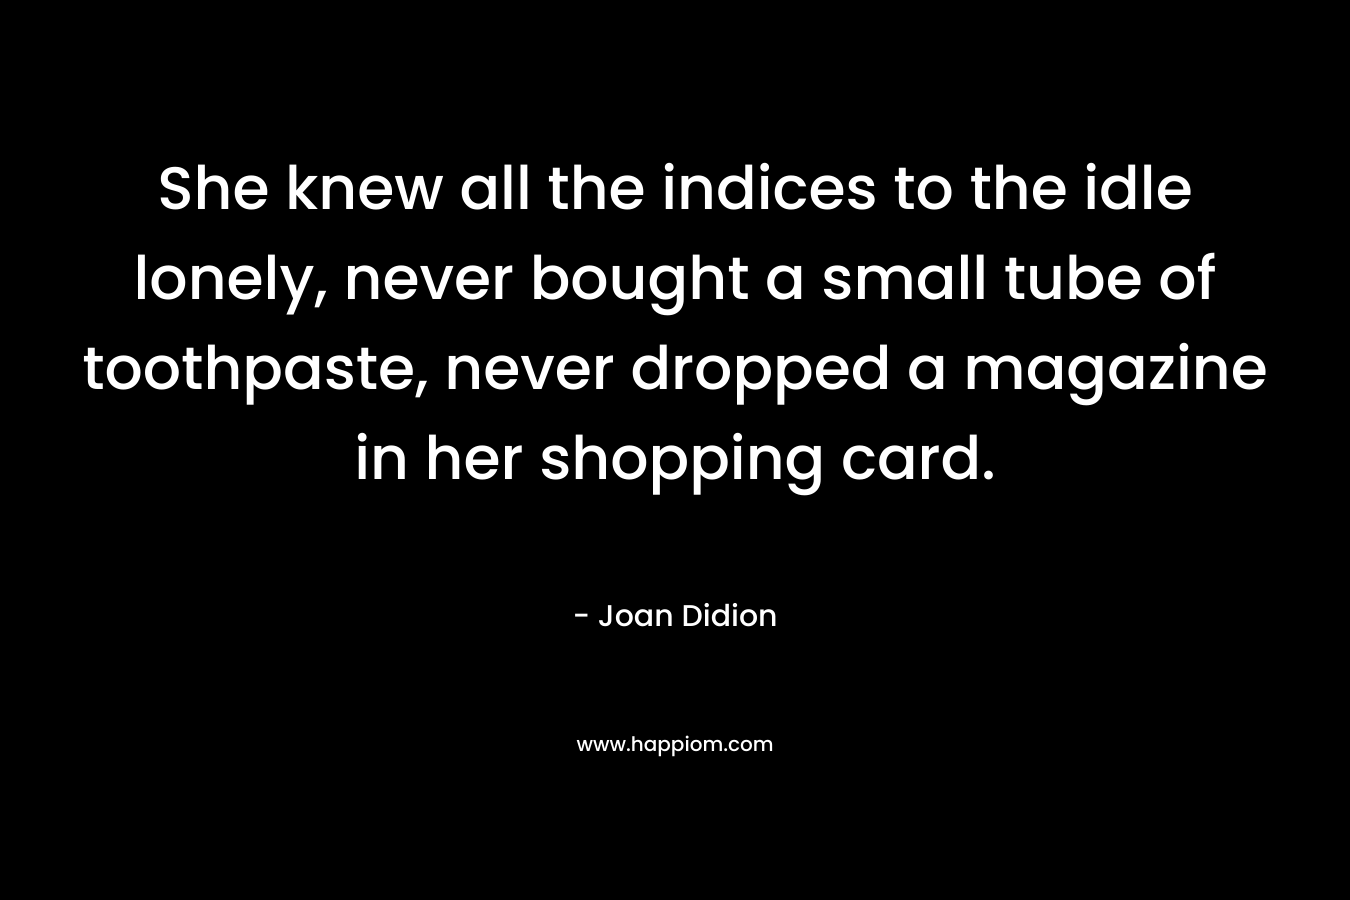 She knew all the indices to the idle lonely, never bought a small tube of toothpaste, never dropped a magazine in her shopping card.